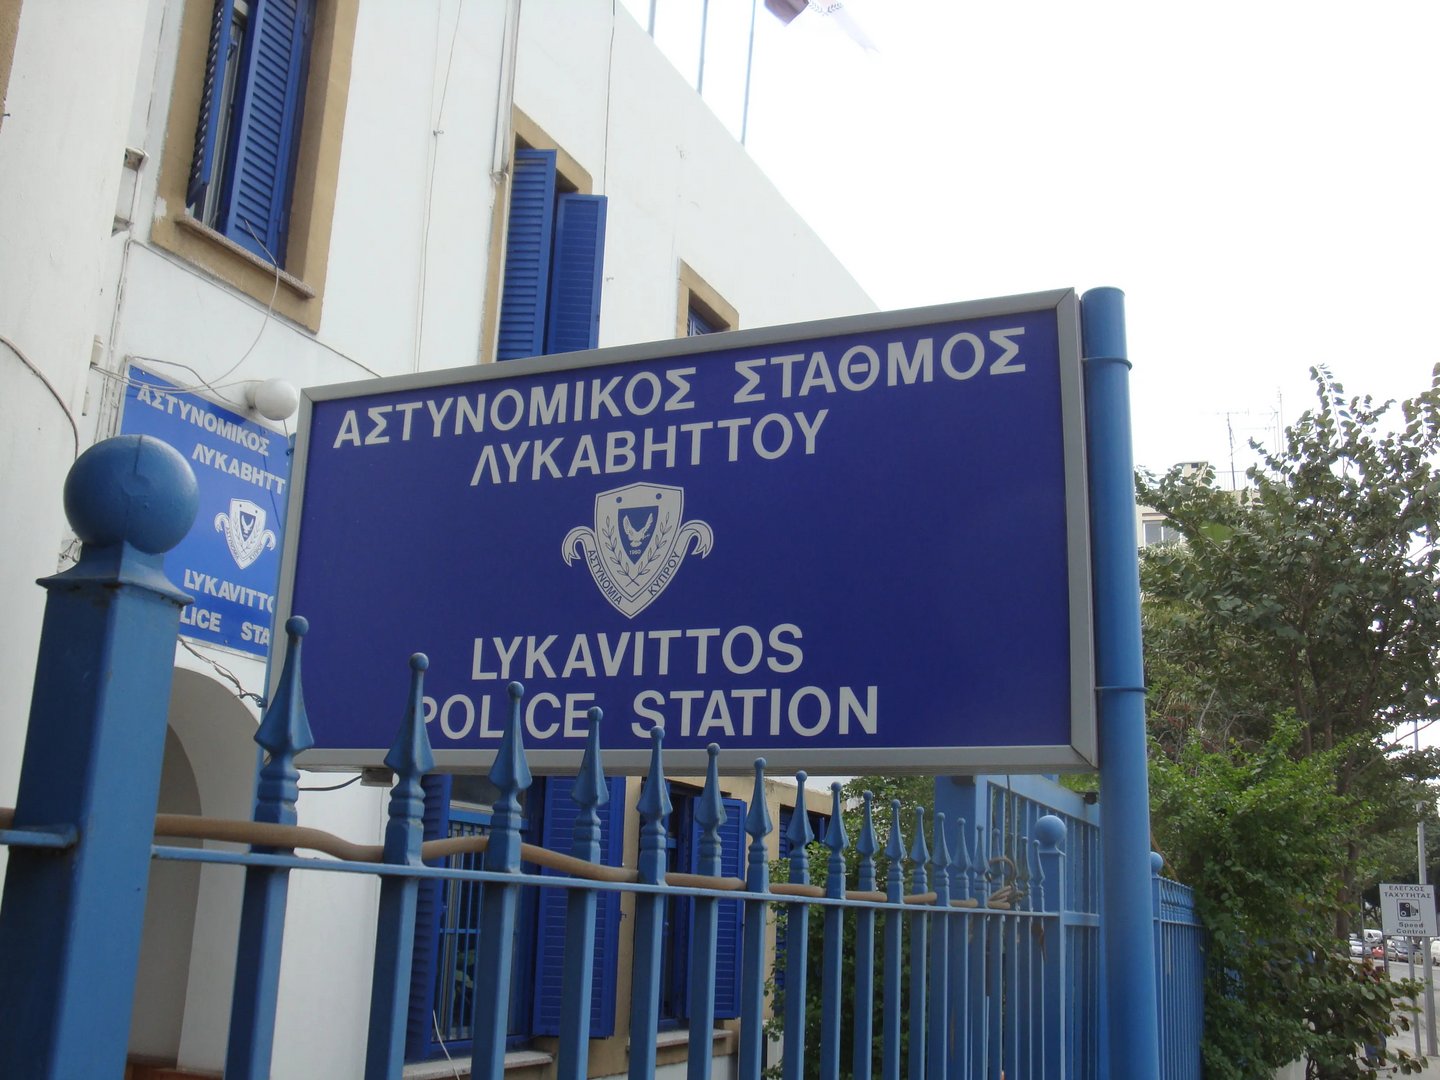 image Photos of Lycavitos police station found on gang members’ phones